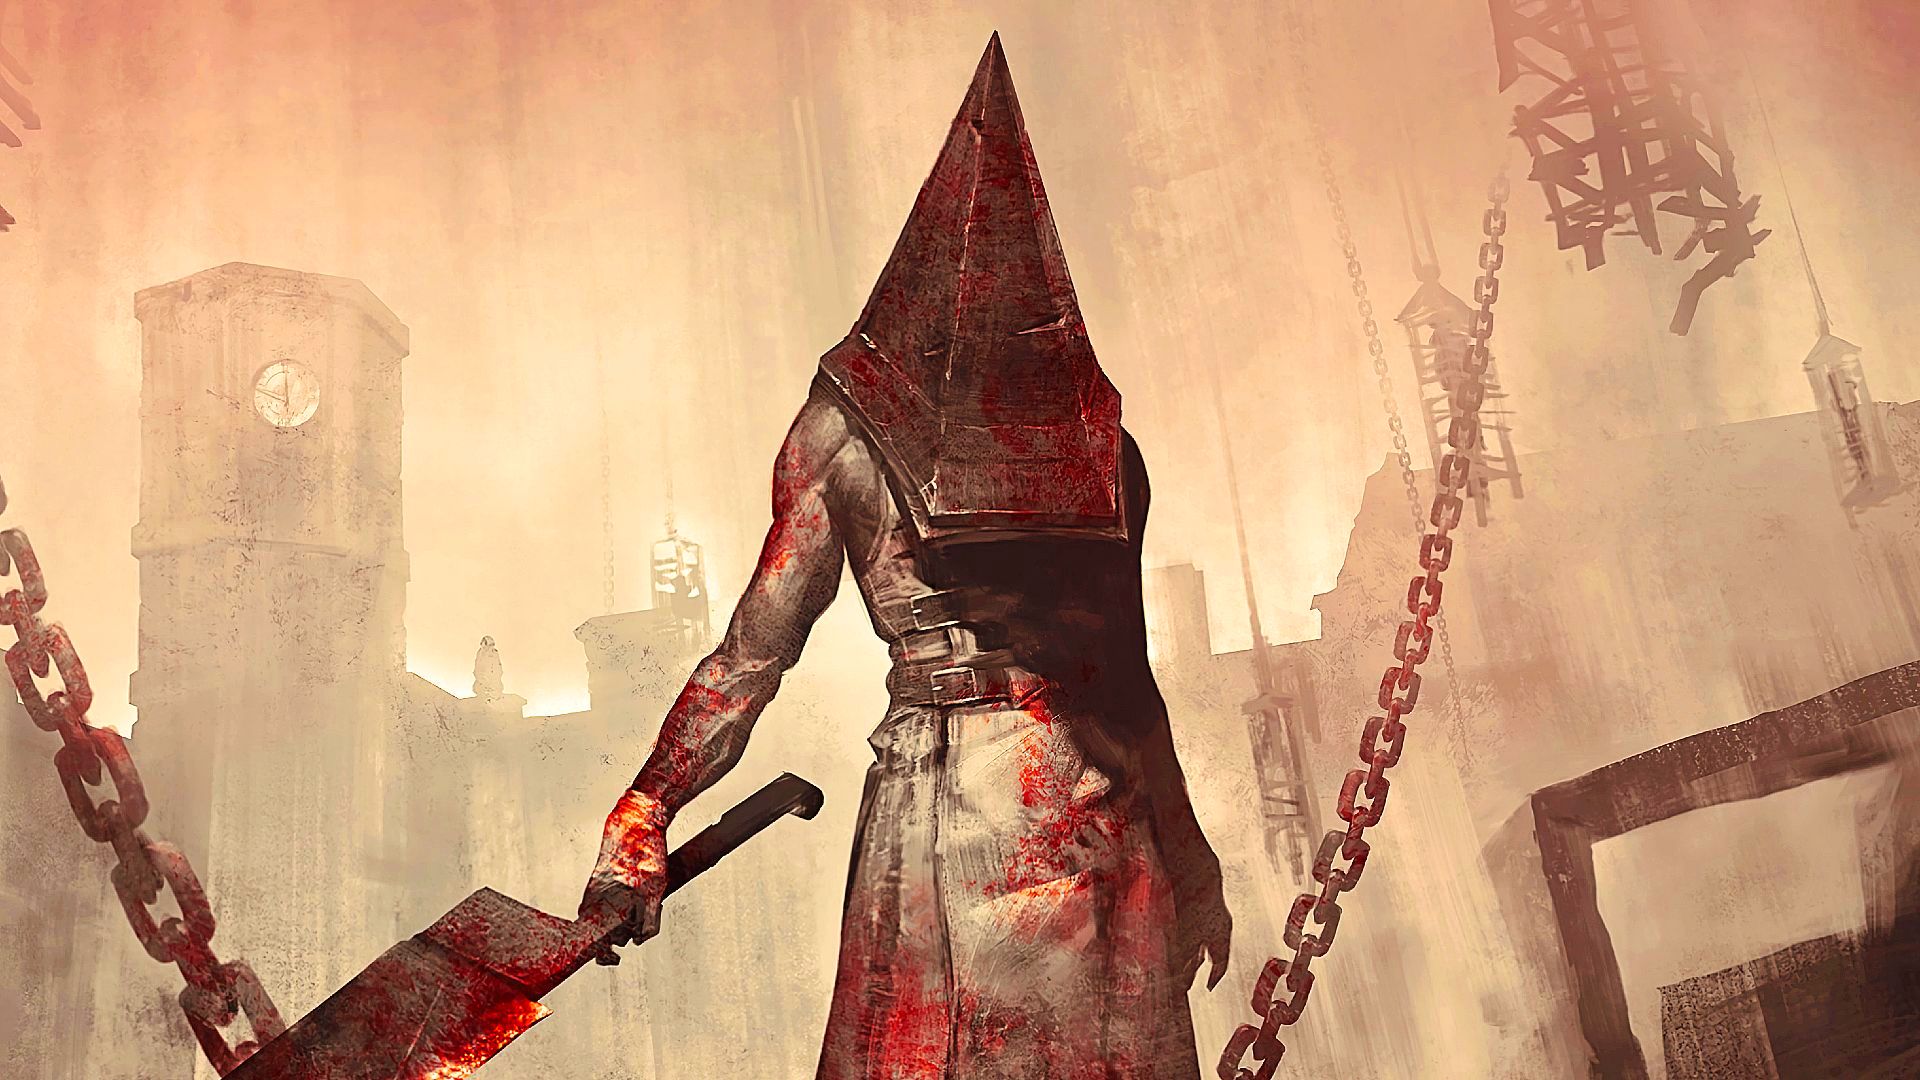 Pyramid Head haunts Dead by Daylight in new costume